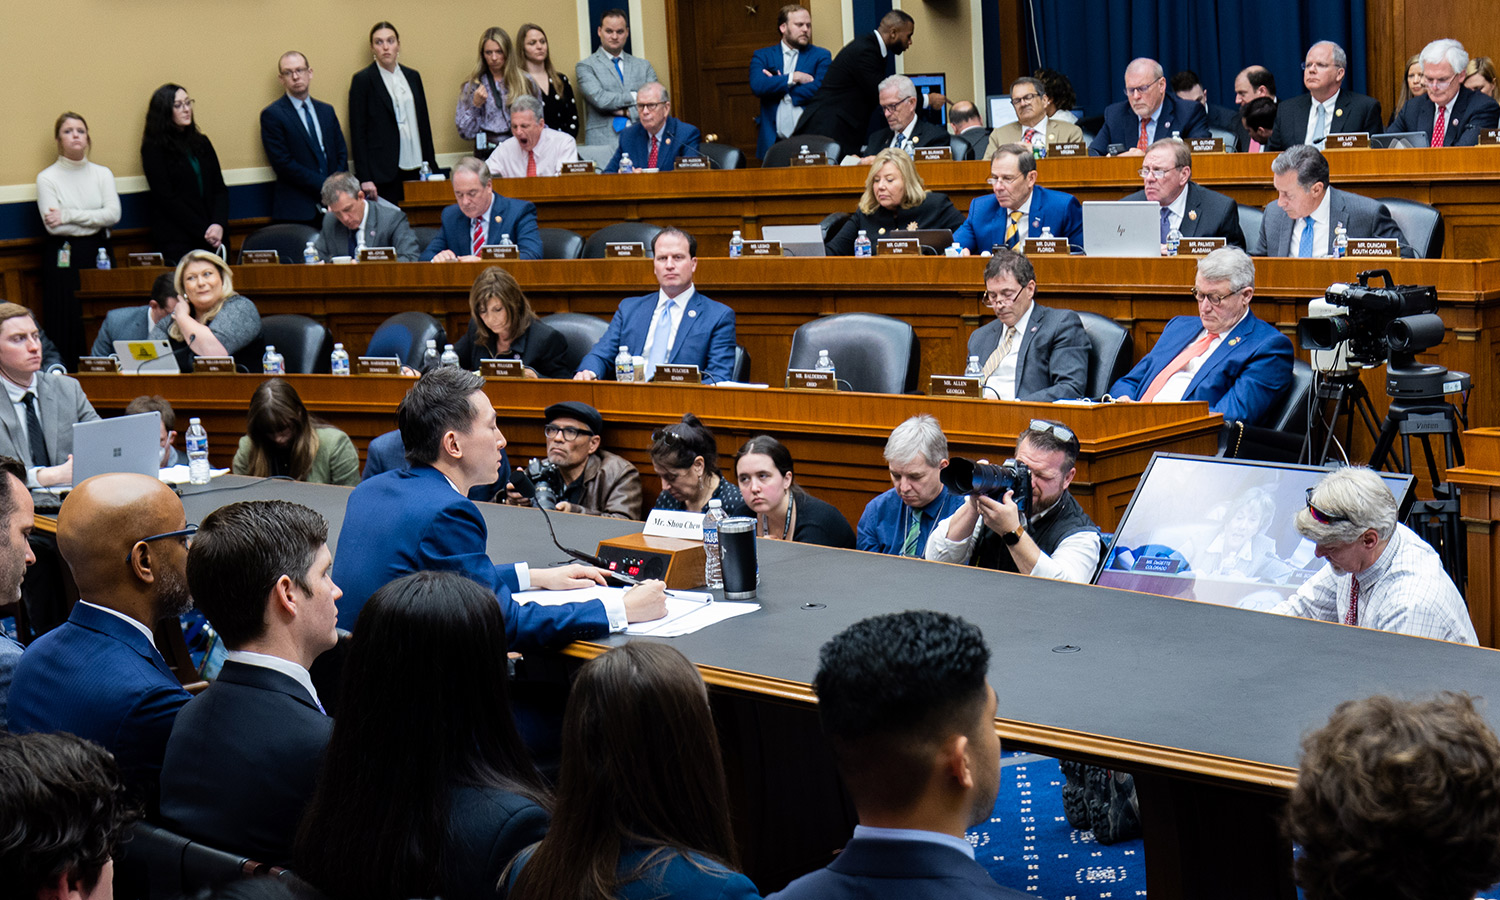 US TikTok CeO Shou Zi Chew appearing before American Congress to answer questions over his comapnies operations. 